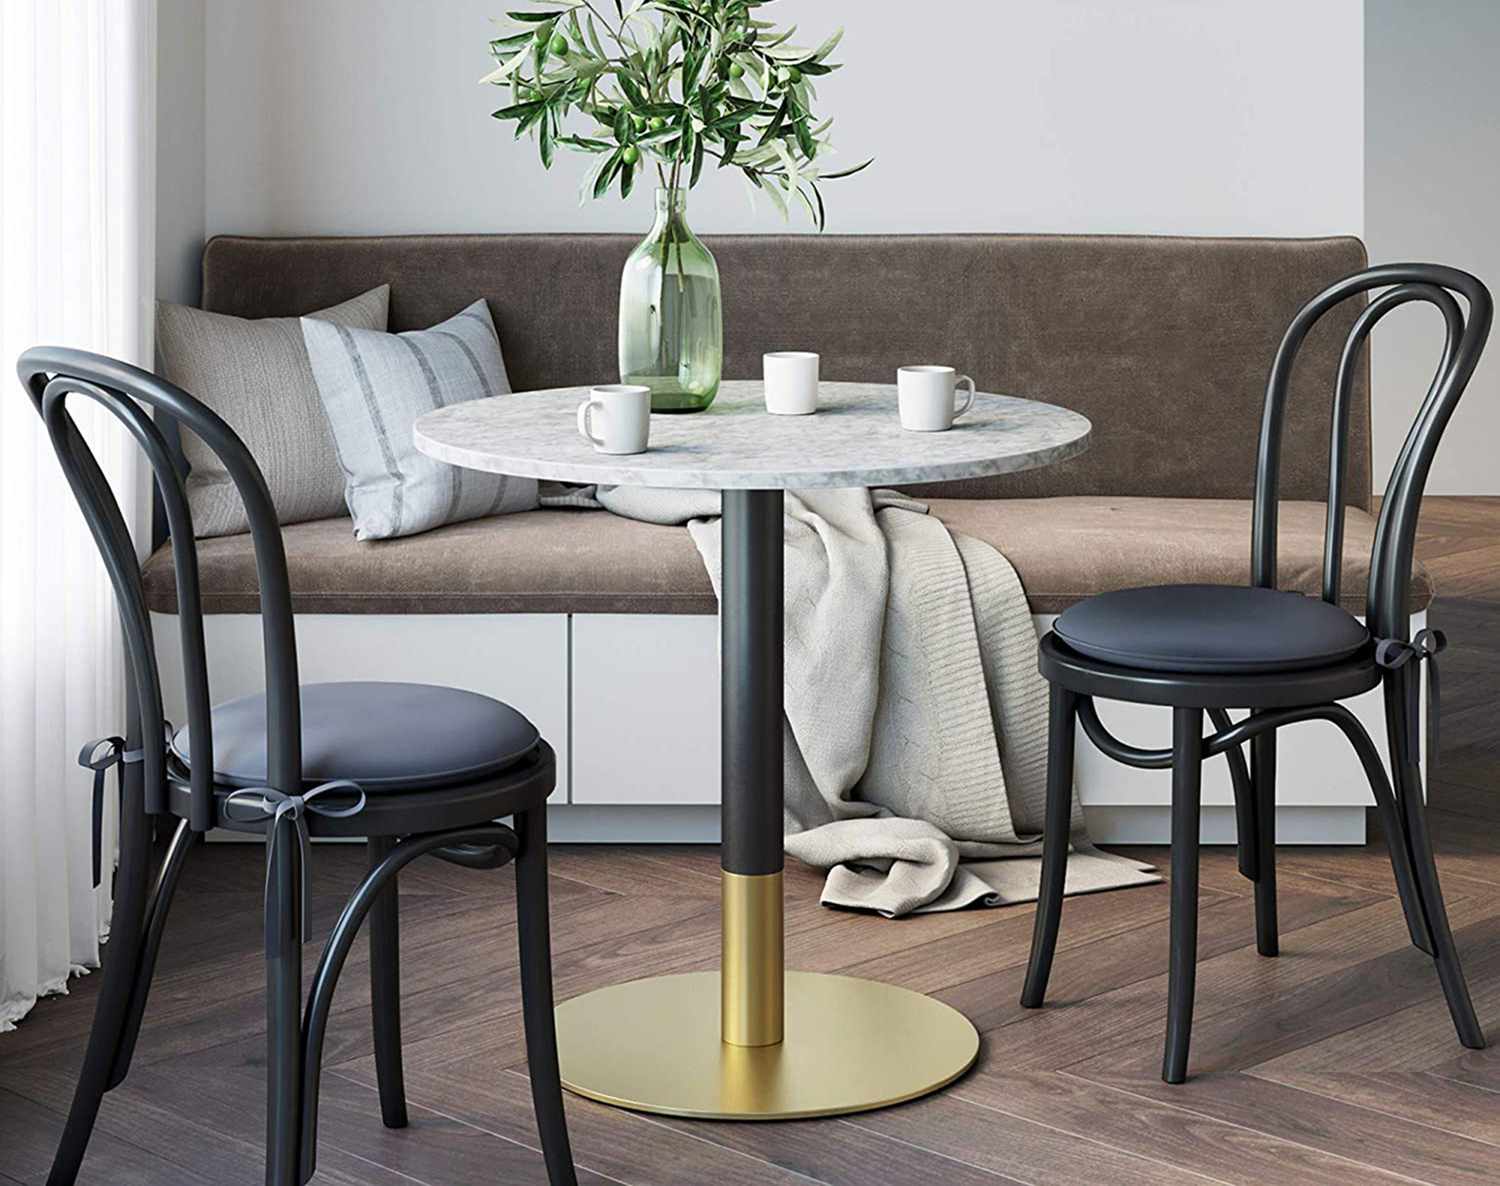 8 Best Dining Tables For Small Spaces, Dining Room Tables For Small Apartments